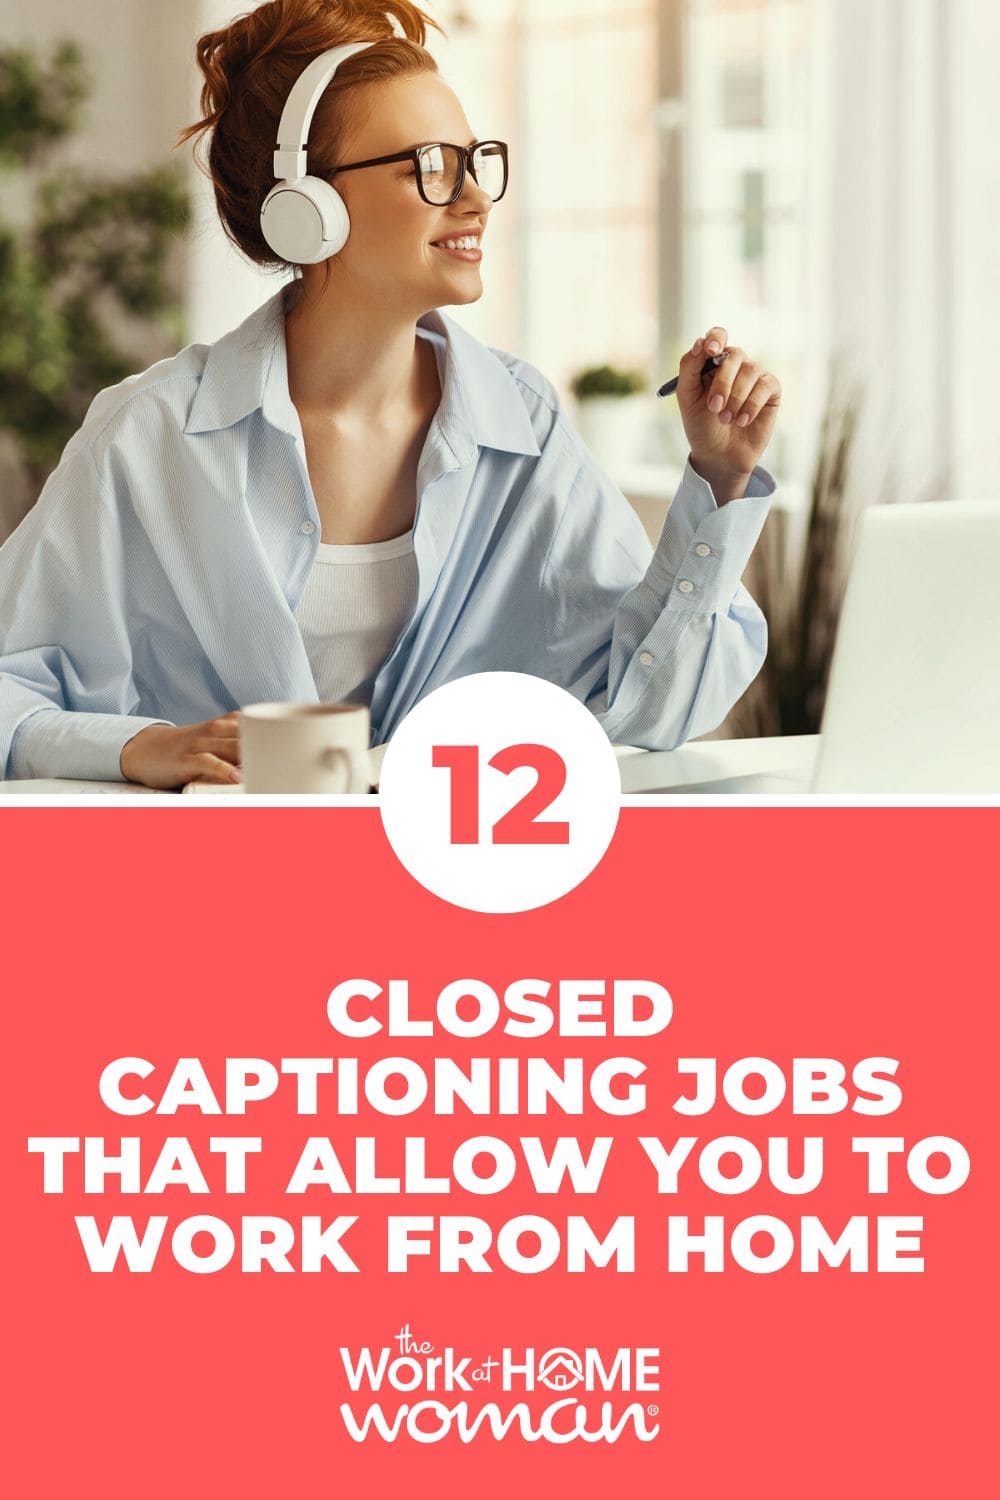 Would you like to work from home watching TV shows, movies, and videos? Then consider applying for these remote closed captioning jobs!